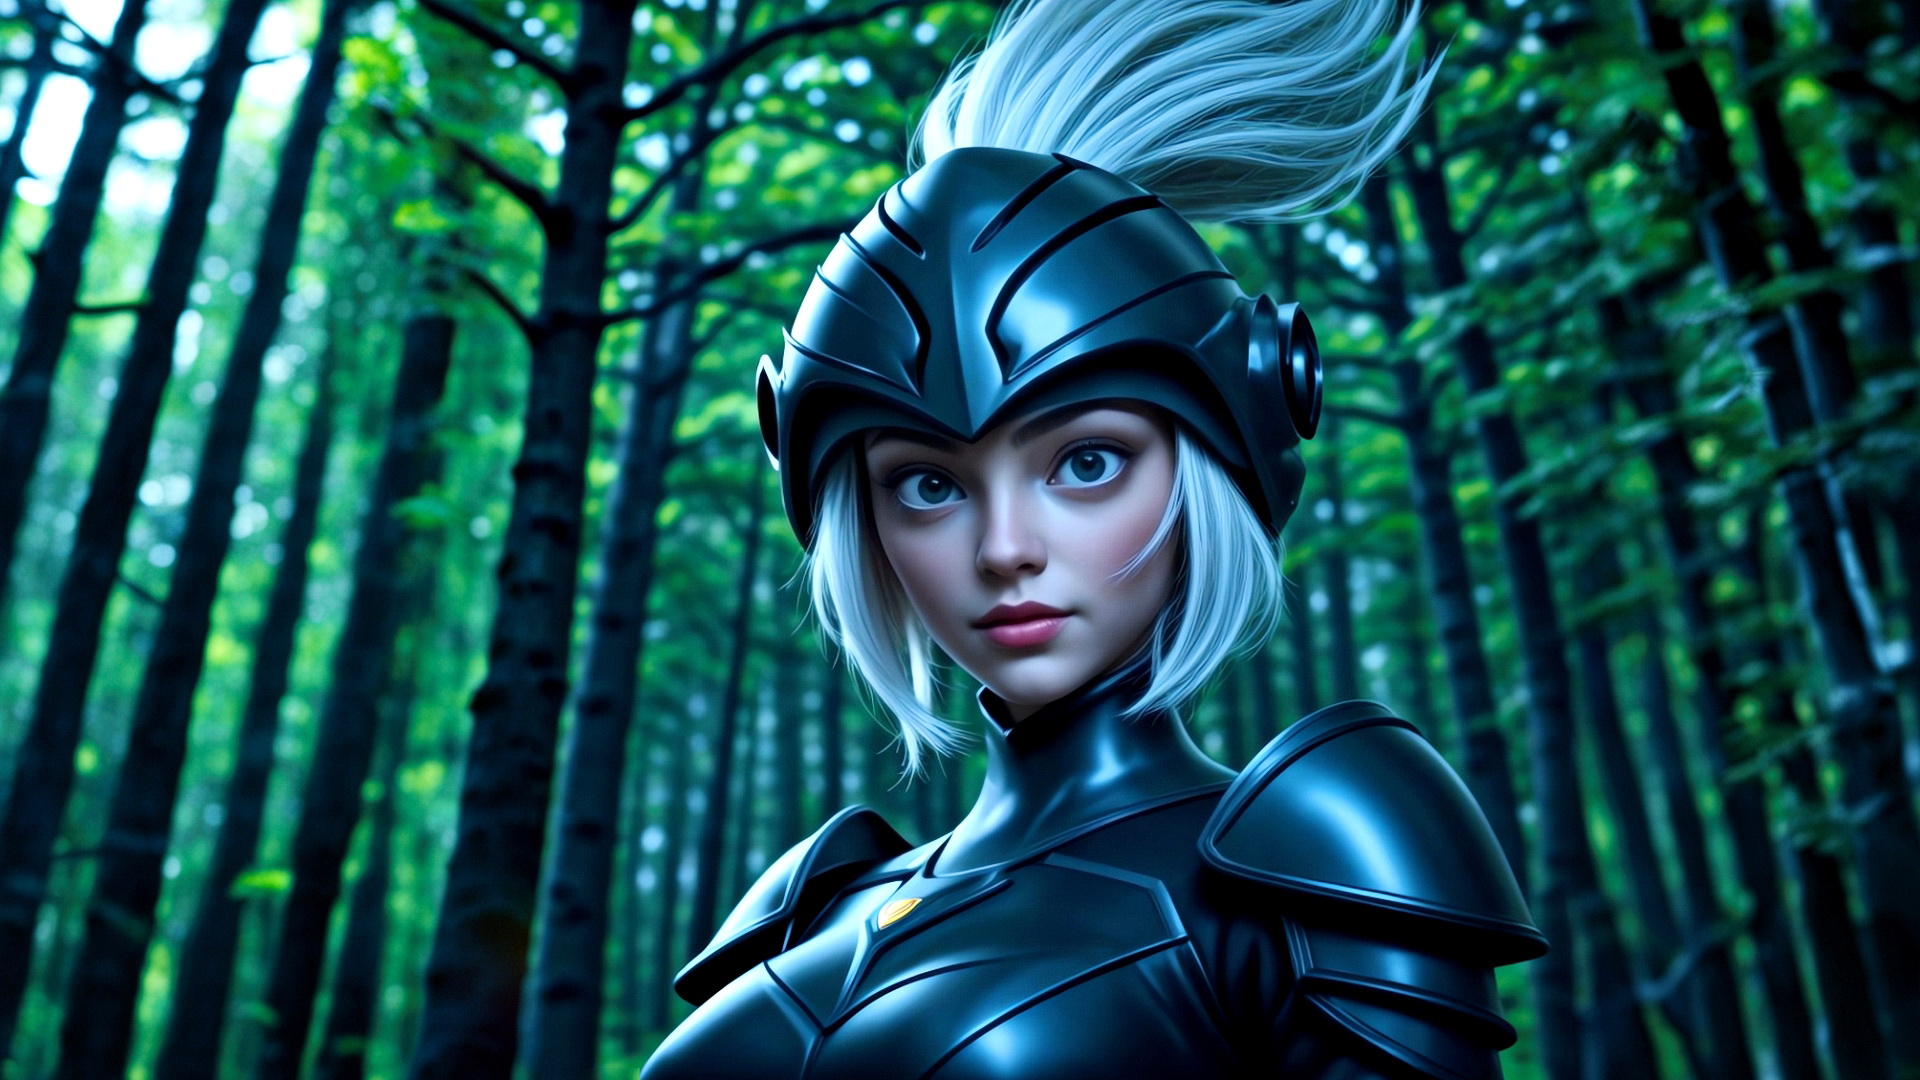 Girl knight in black armor and helmet on the background of the forest